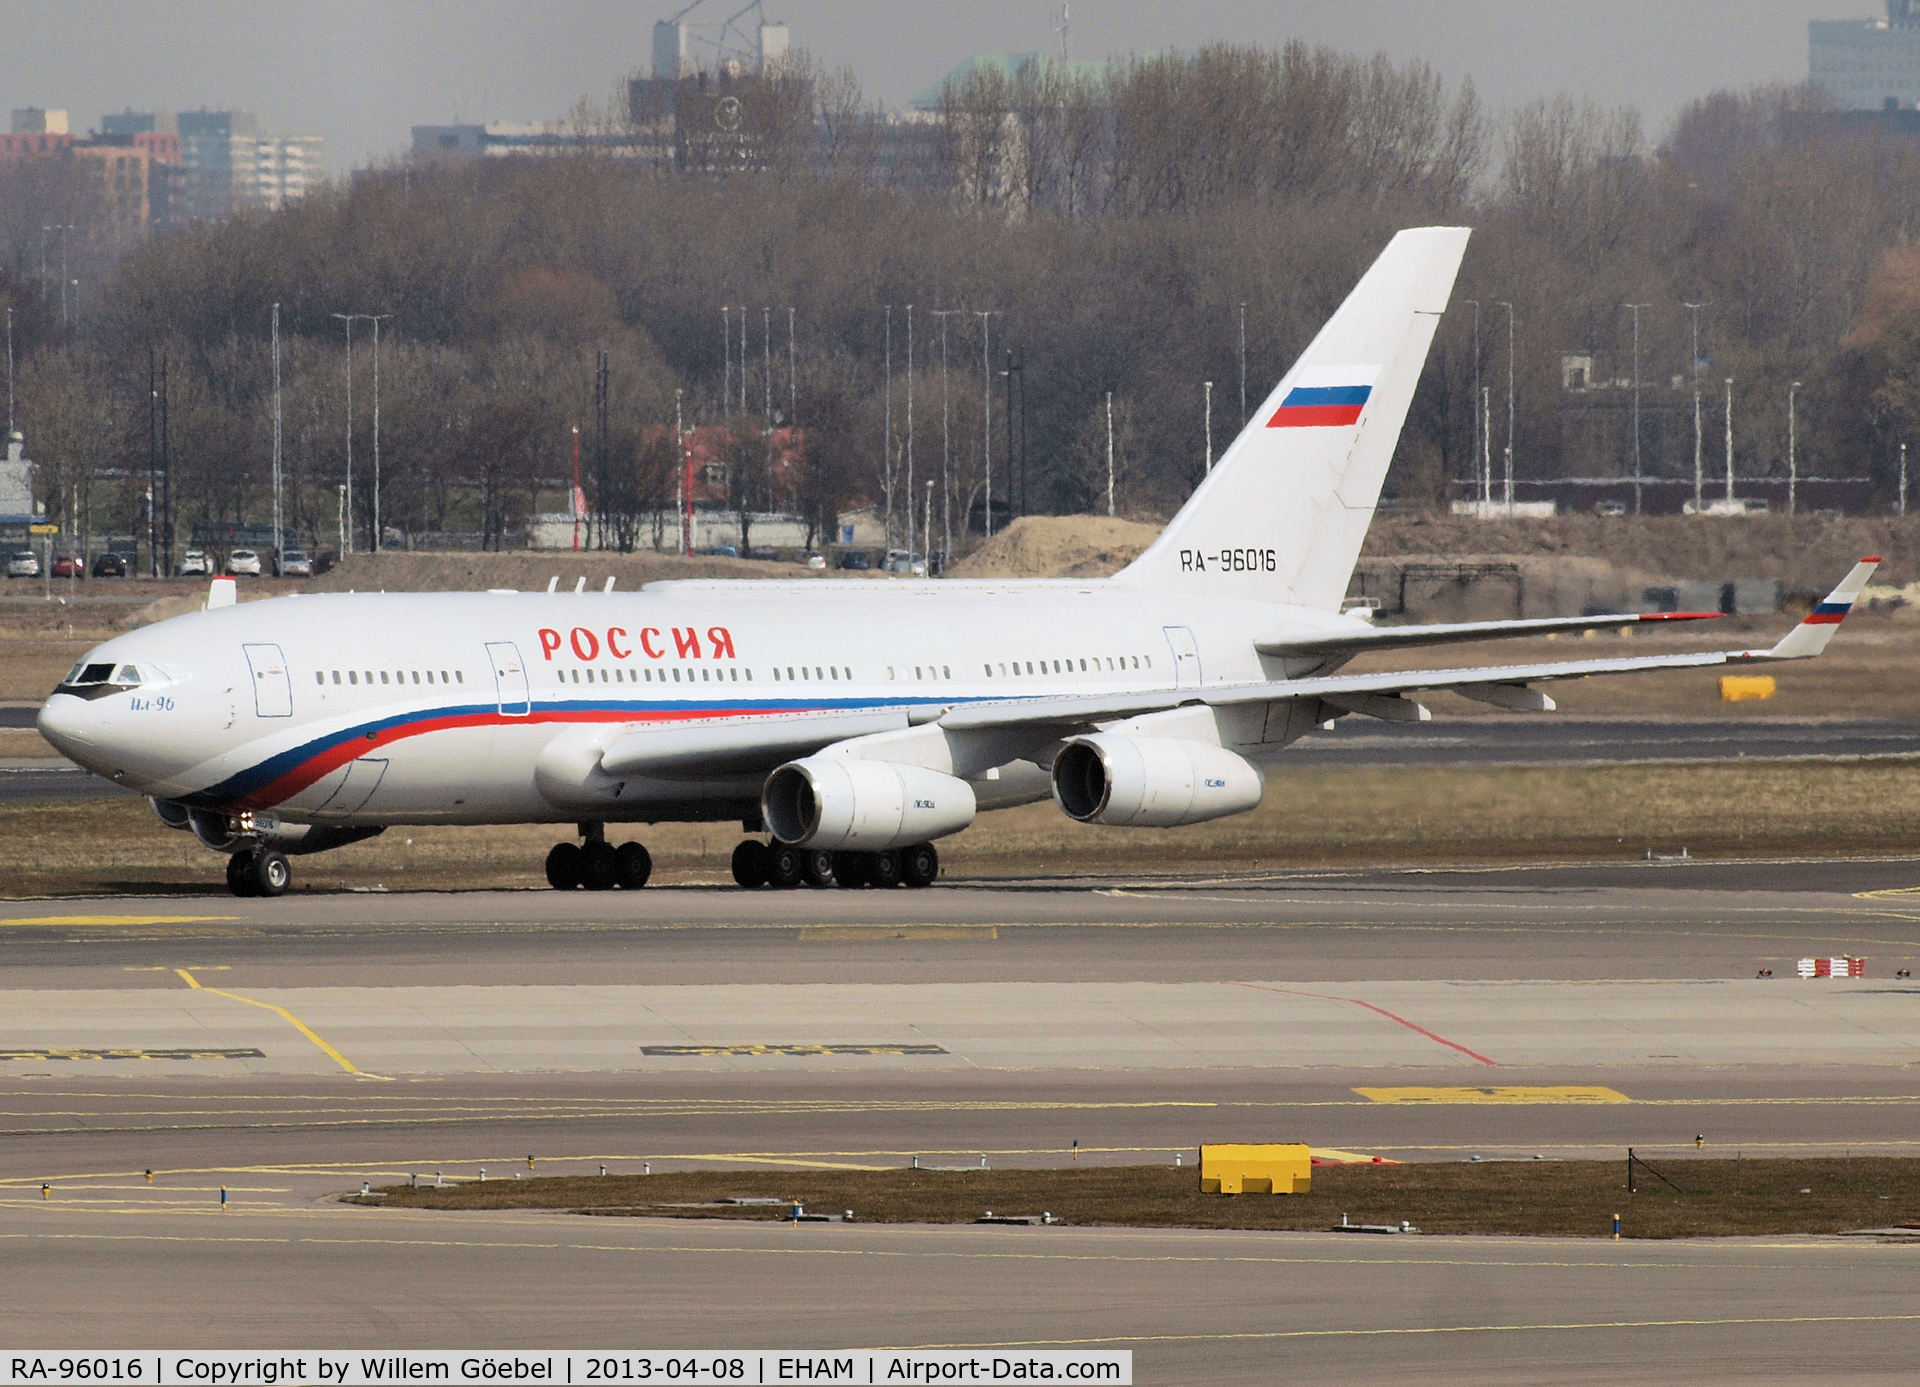 RA-96016, 2004 Ilyushin Il-96-300 C/N 74393202010, Just arrive for a visit of the Russian Premier Poetin